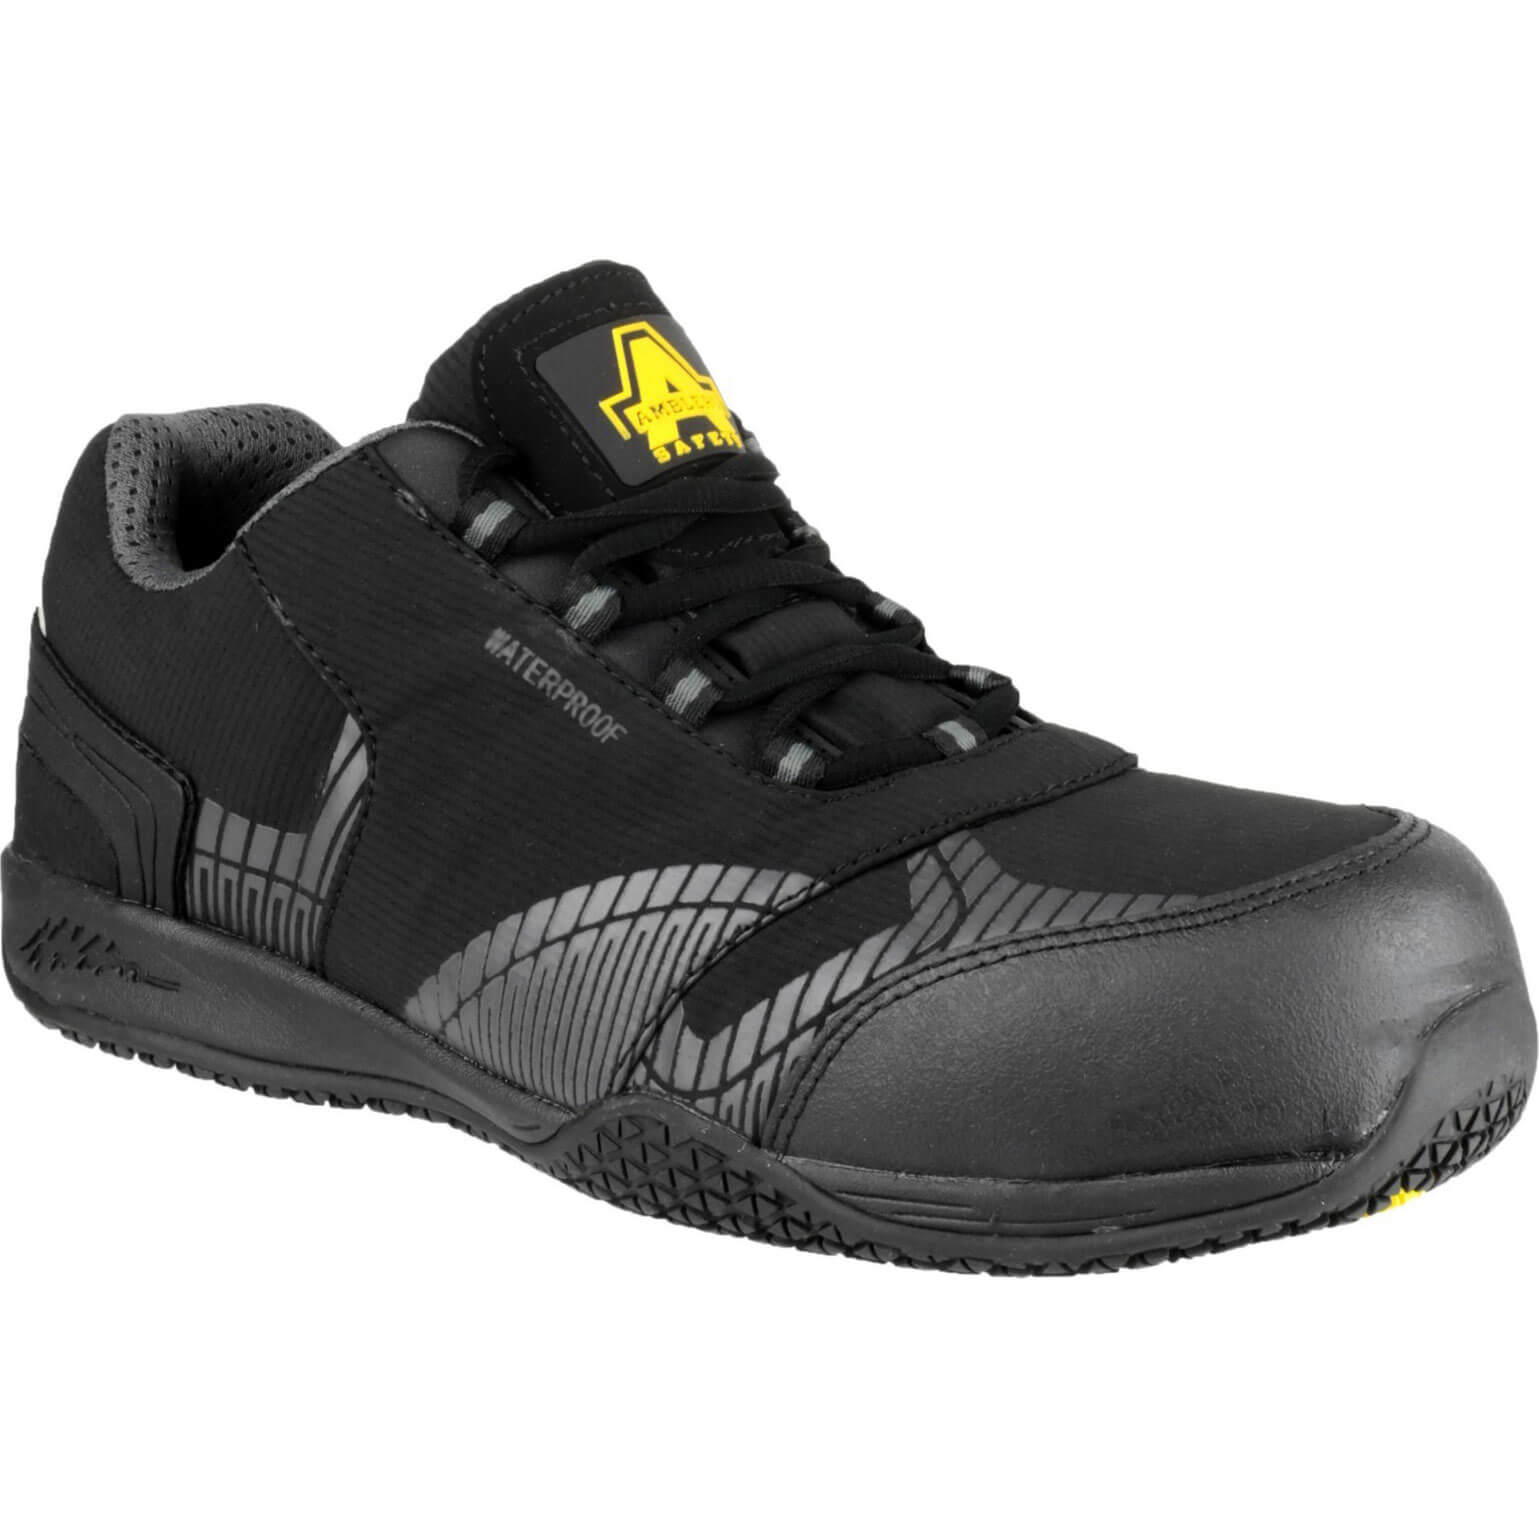 Photo of Amblers Safety Fs29c Waterproof Metal Free Non Leather Safety Trainer Black Size 7